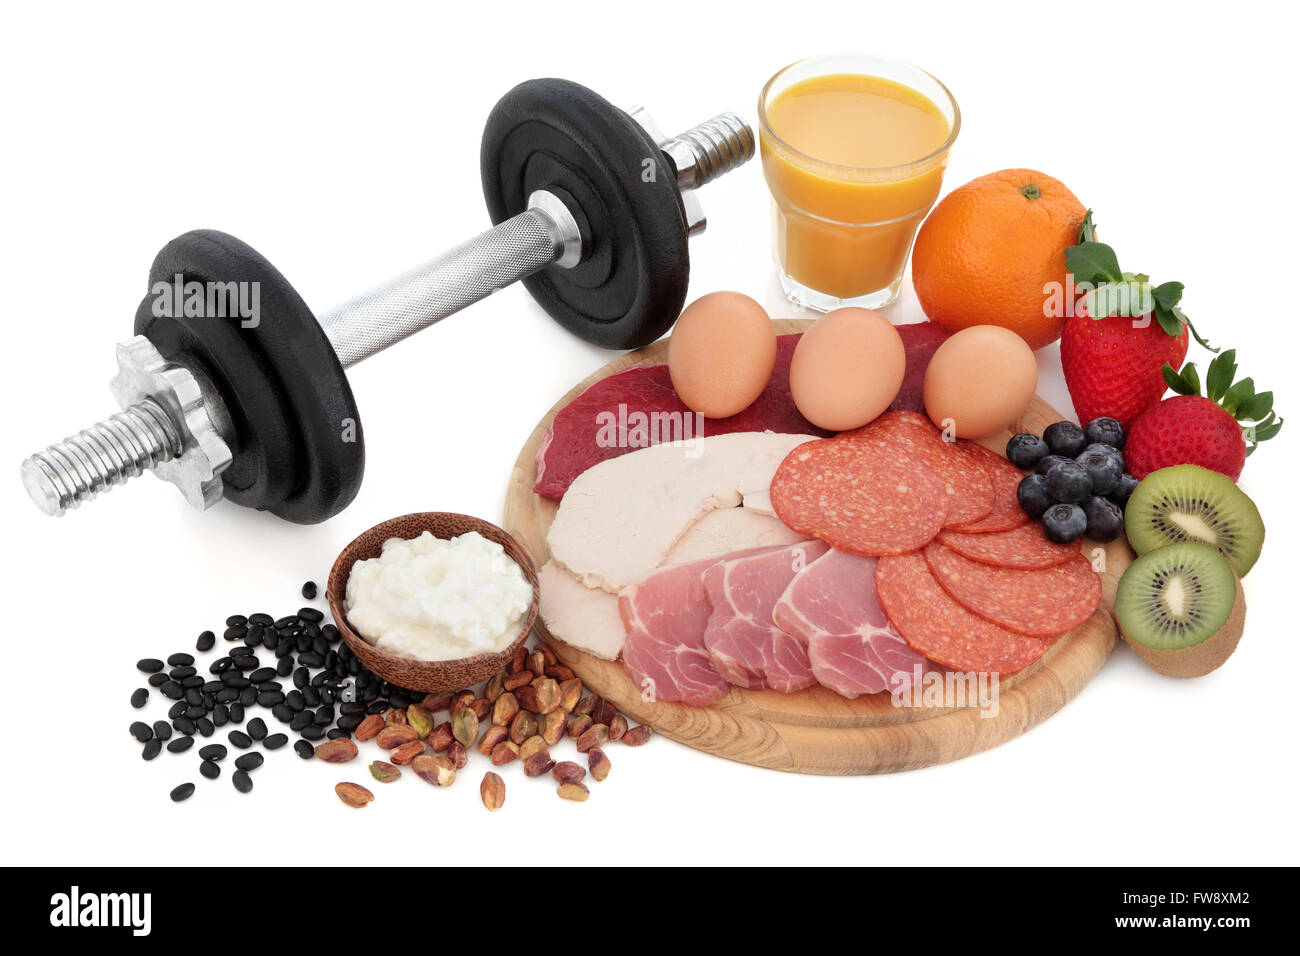 Health And Body Building High Protein Food Of Meat Nuts Pulses